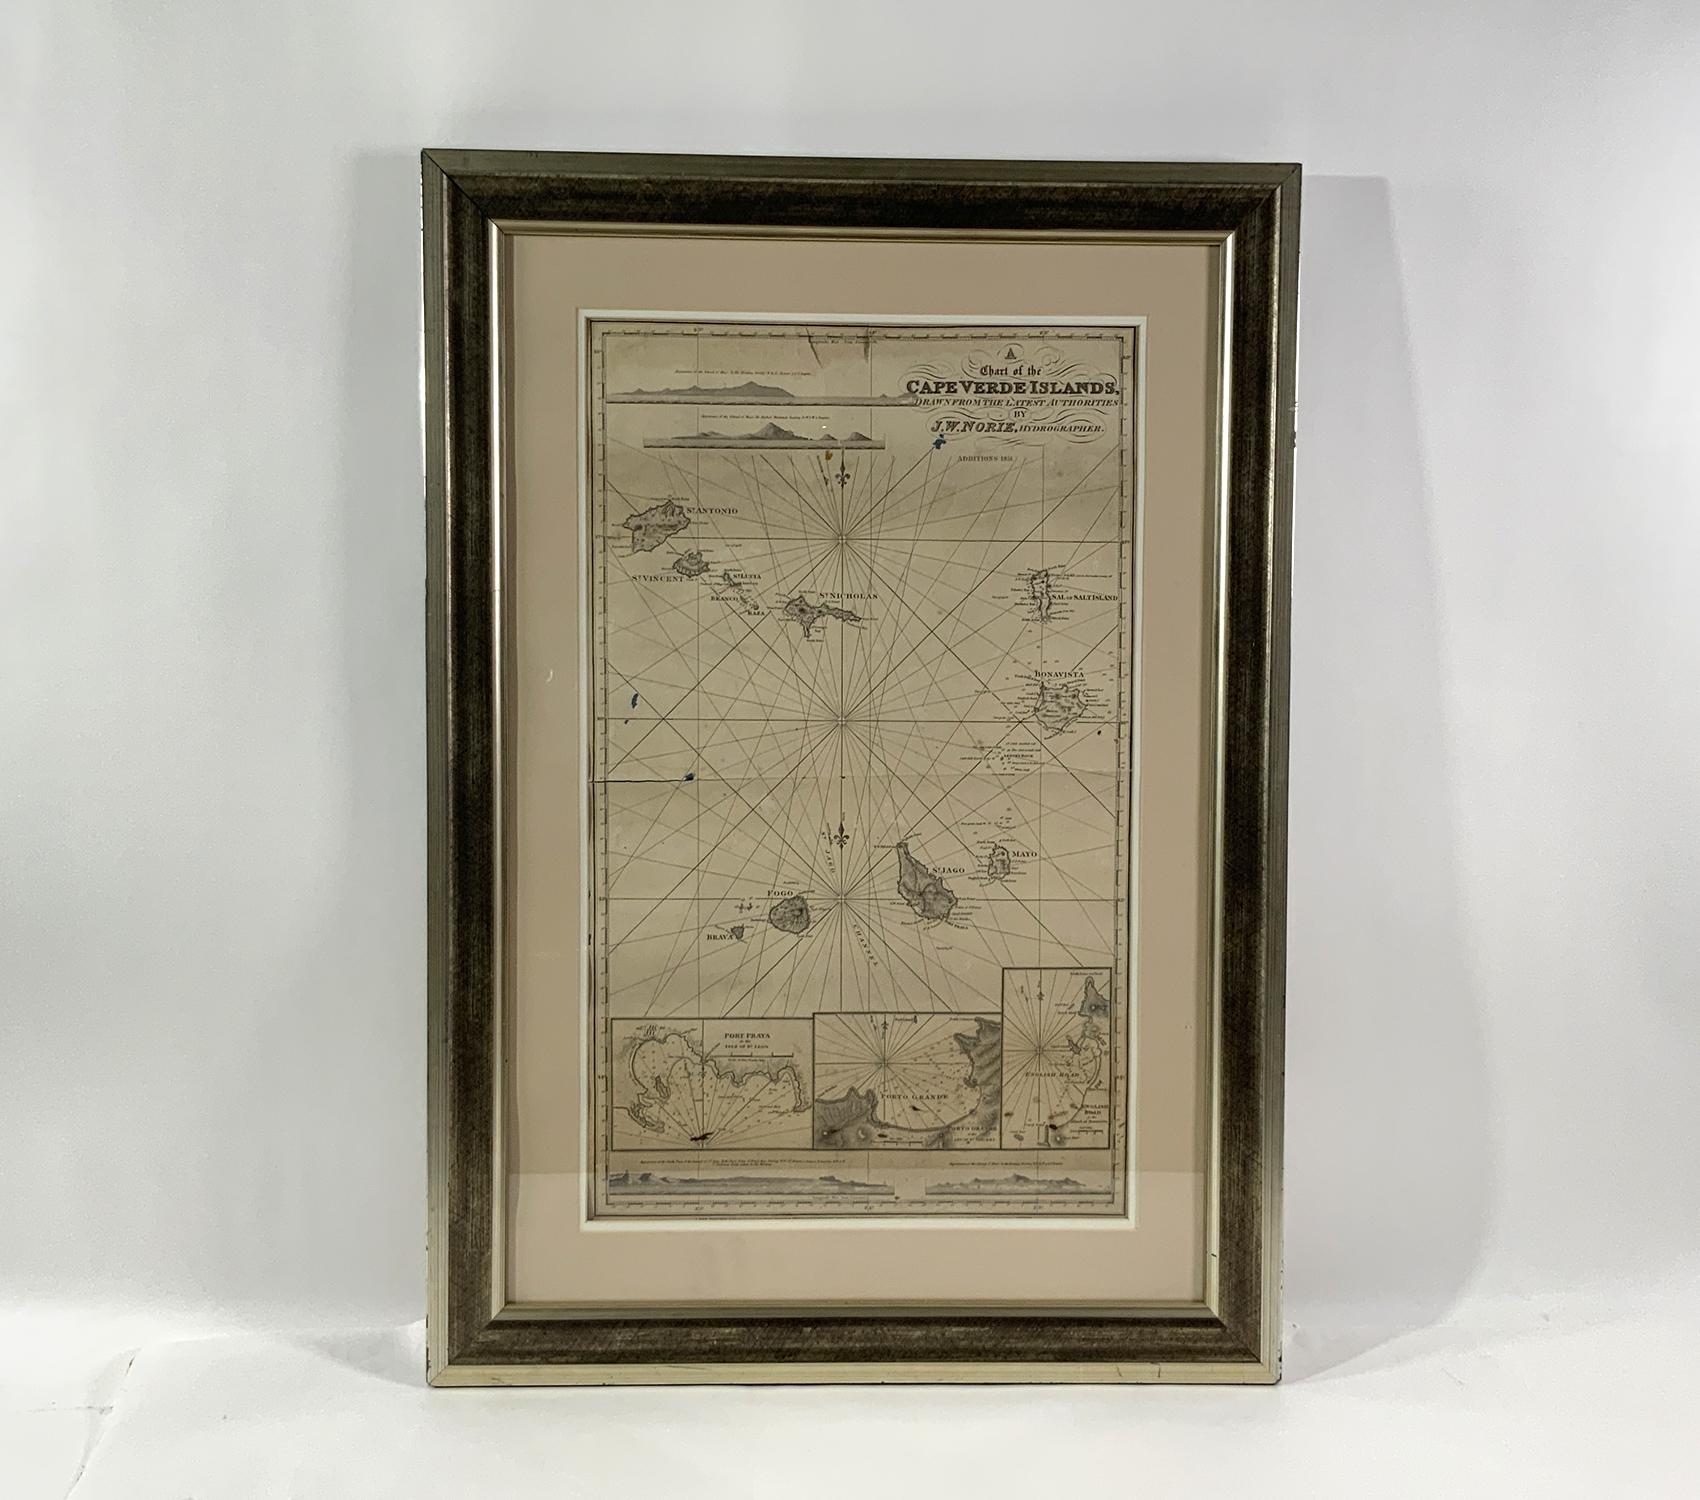 J.W. Norie Chart of the Cape Verde Islands, Circa 1851. This chart shows Fogo, St. Jago, Bonavista, St. Nicholas, St. Antonio, St. Vincent, etc.. With enlarged panels showing important ports. Wonderful condition and 170 years old!. Circa 1851.